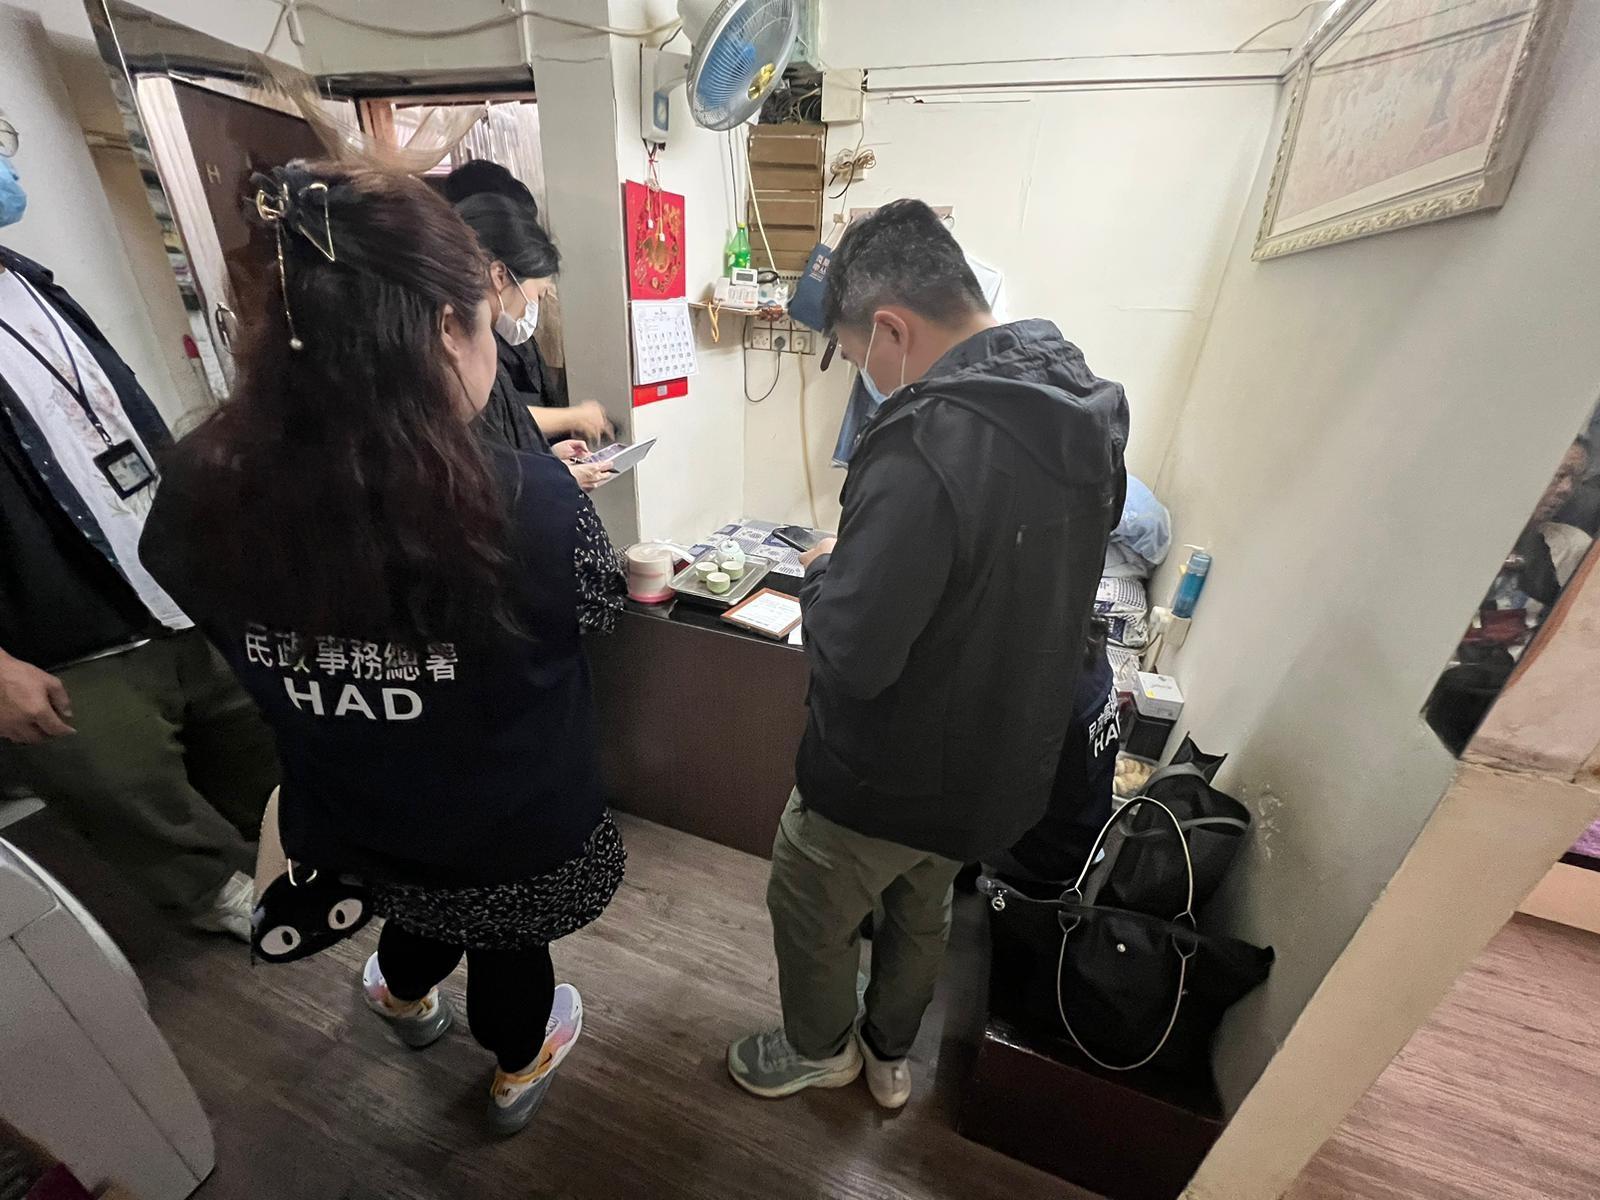 The Office of the Licensing Authority (OLA) of the Home Affairs Department yesterday (March 25) conducted a joint surprise operation with the Hong Kong Police Force to inspect one place of premises in Yuen Long District that was suspected of operating an unlicensed guesthouse. Photo shows OLA enforcement officers searching for evidence in a suspected unlicensed guesthouse.